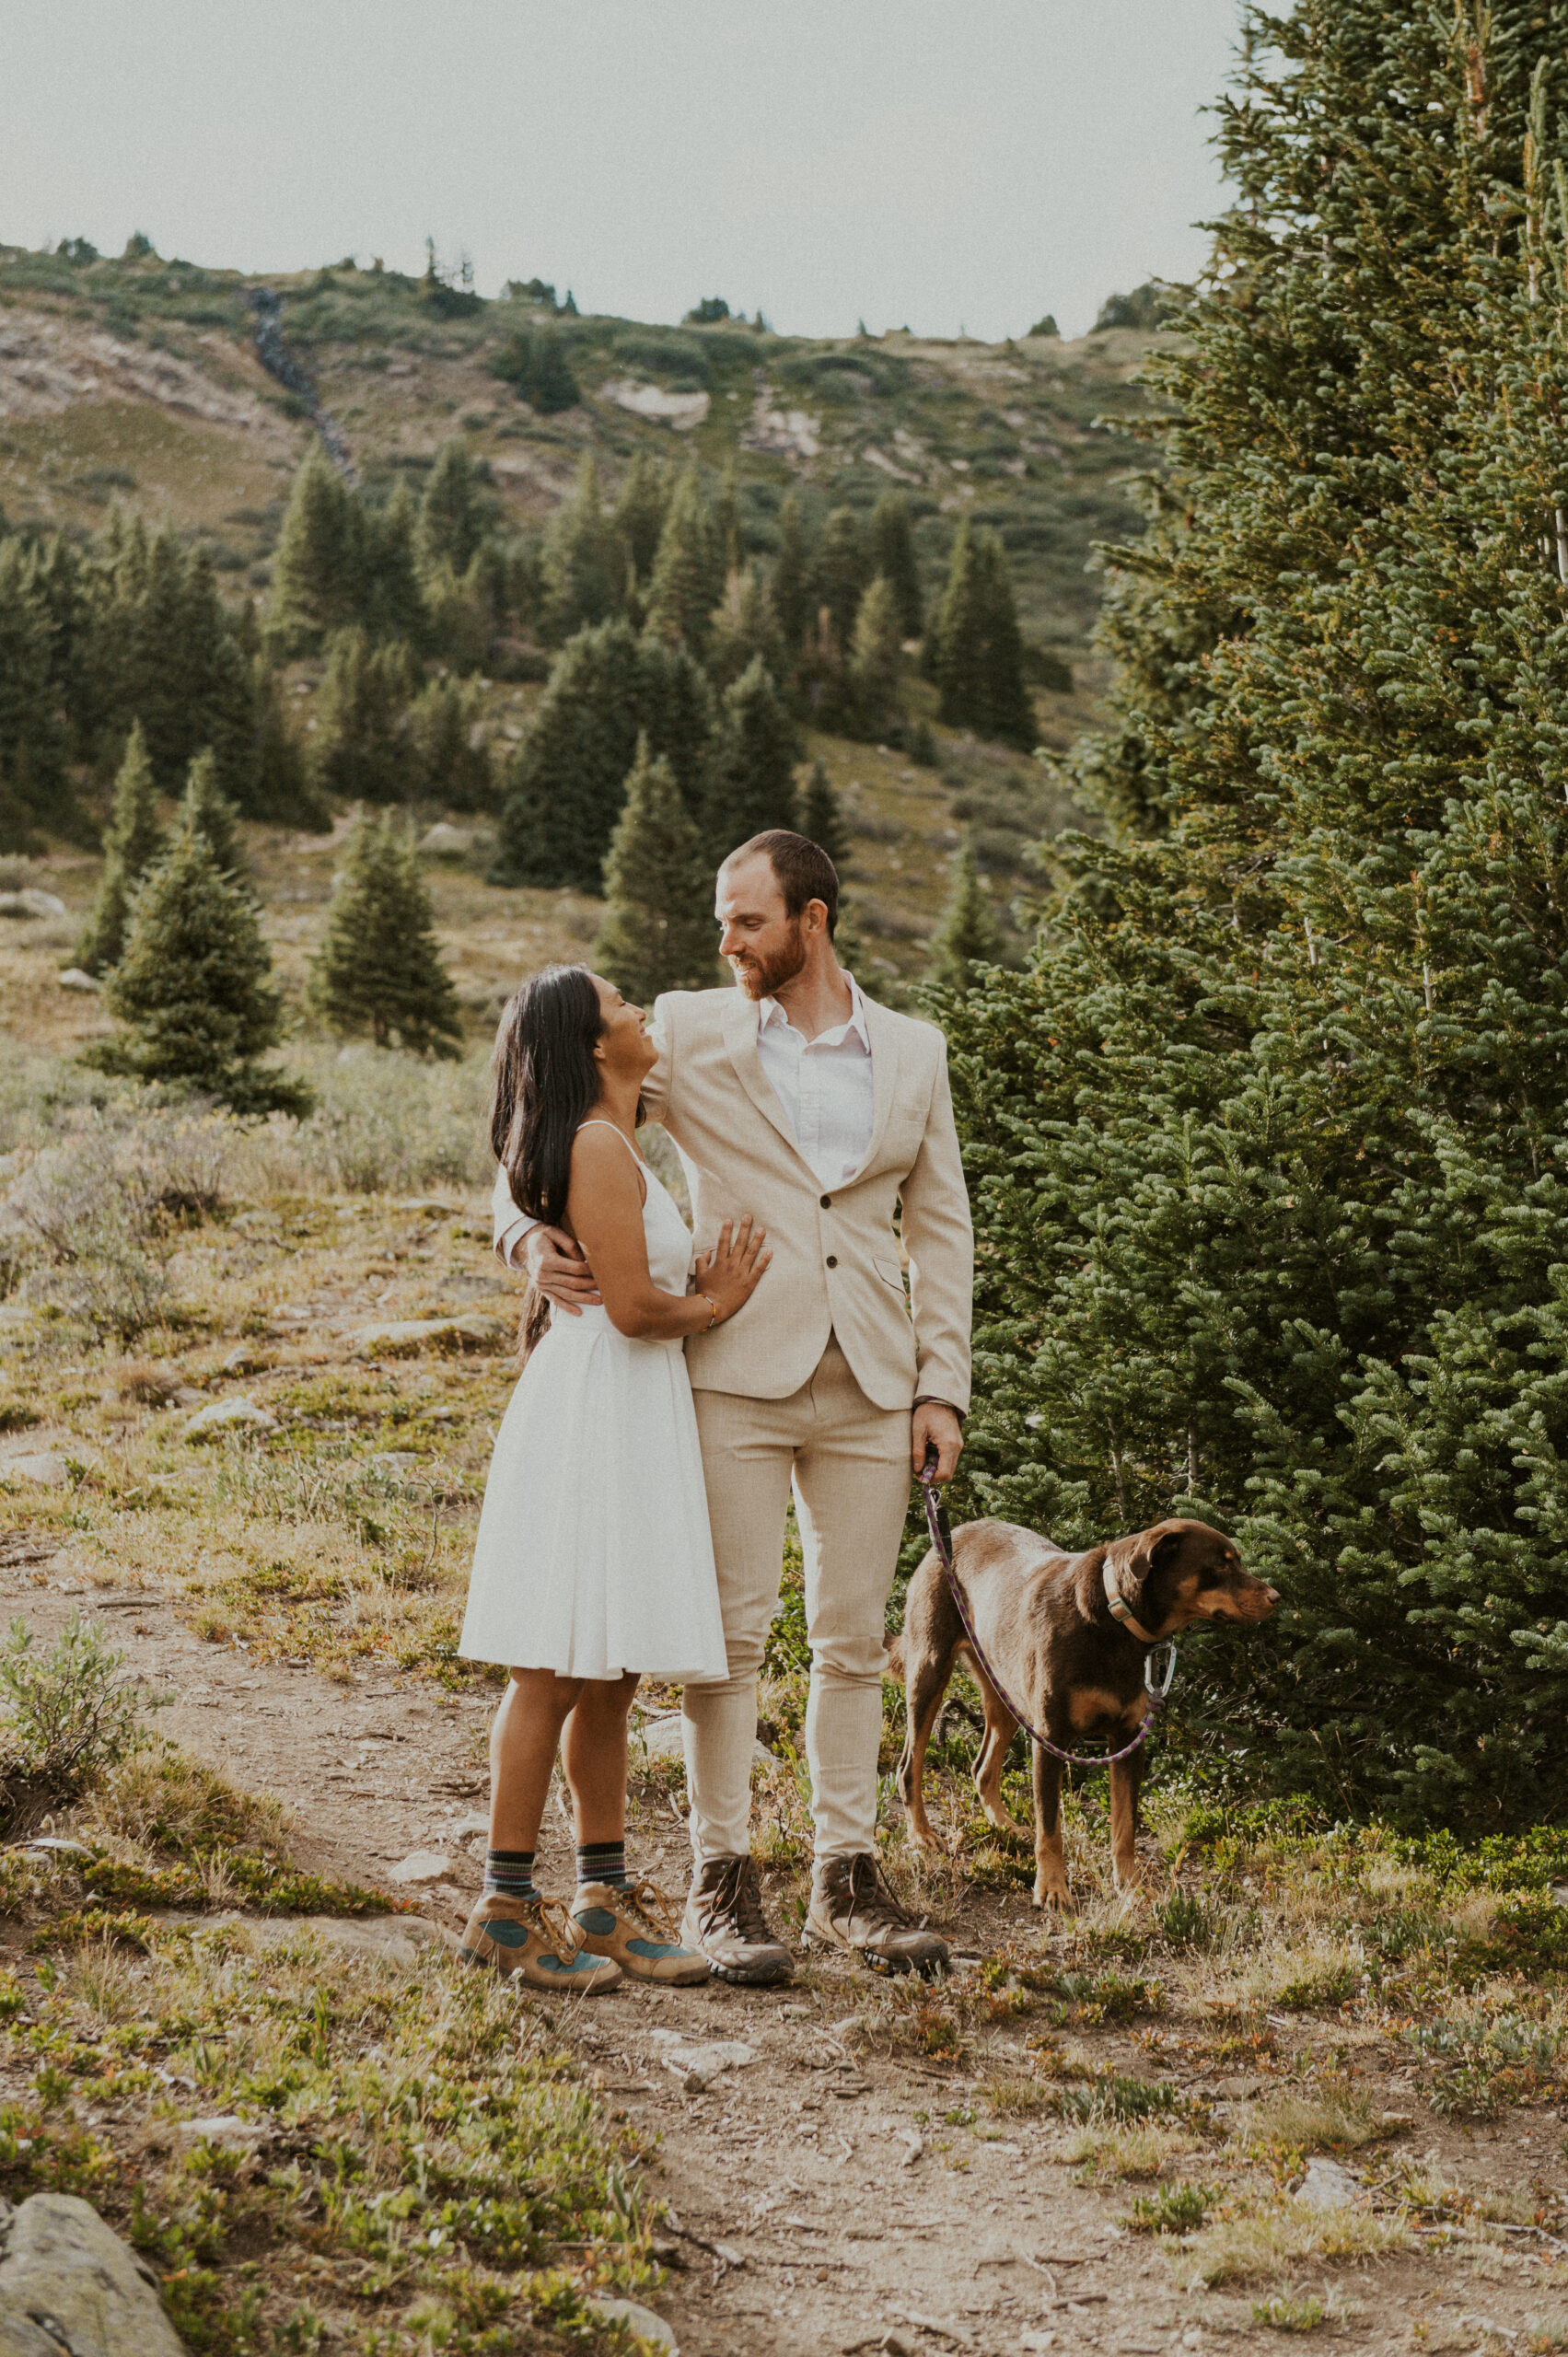 Couple embracing in the forest and holding their dog during their dog-friendly Colorado elopement.